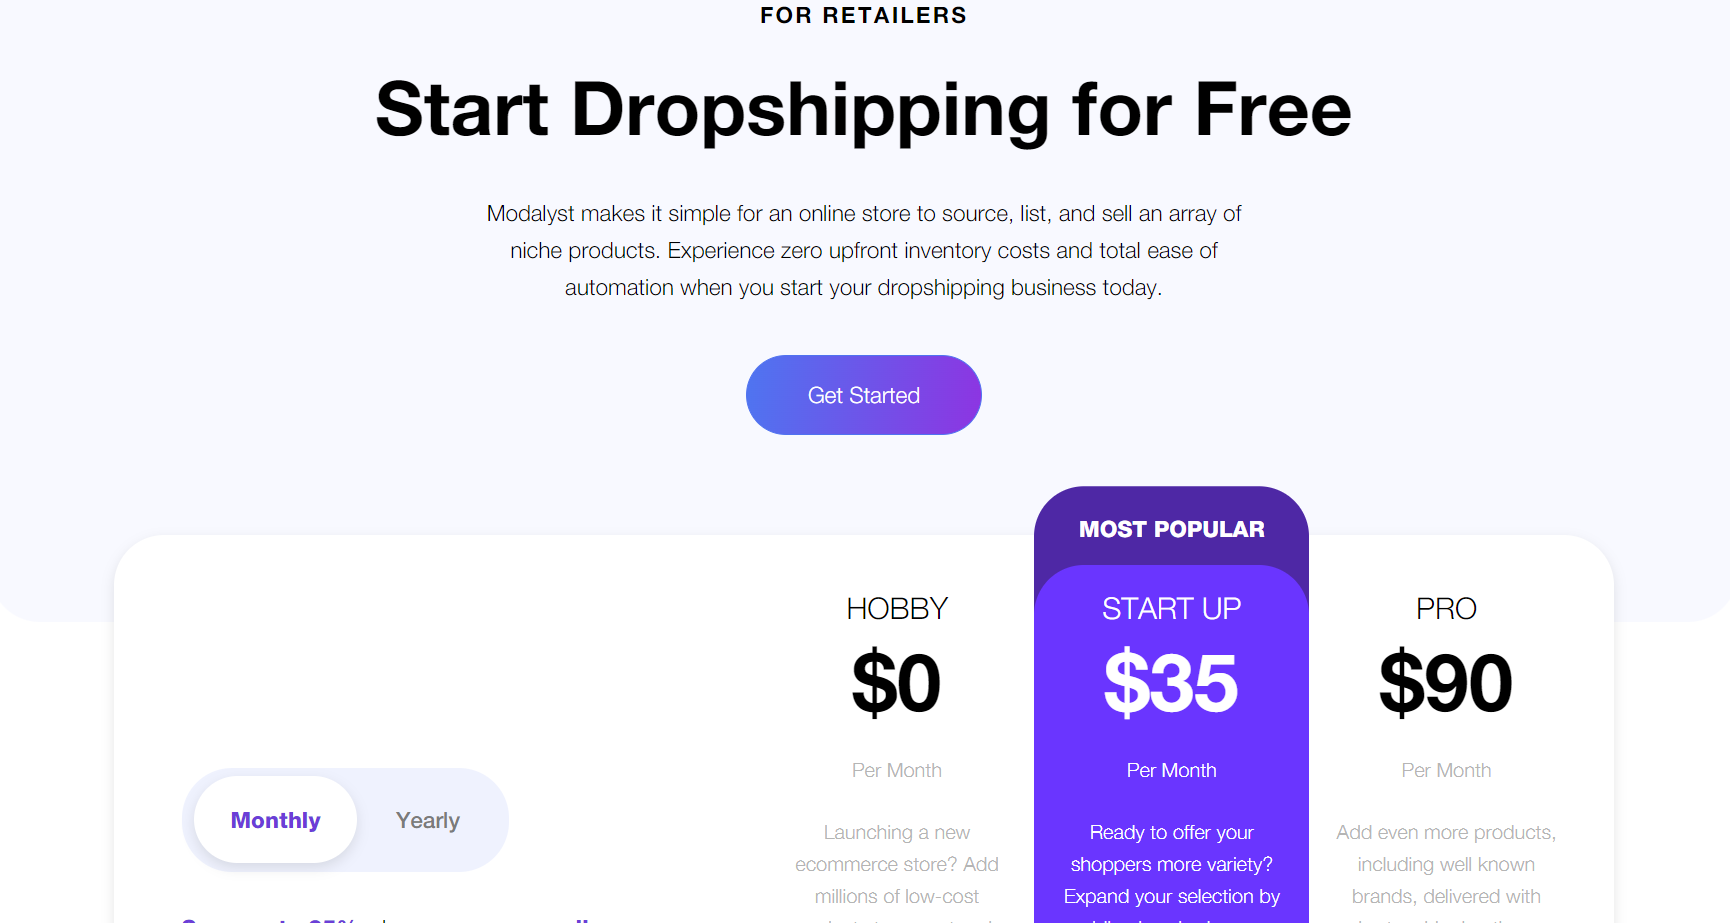 WHAT AFFECTS MODALYST DROPSHIPPING’S PRICES?